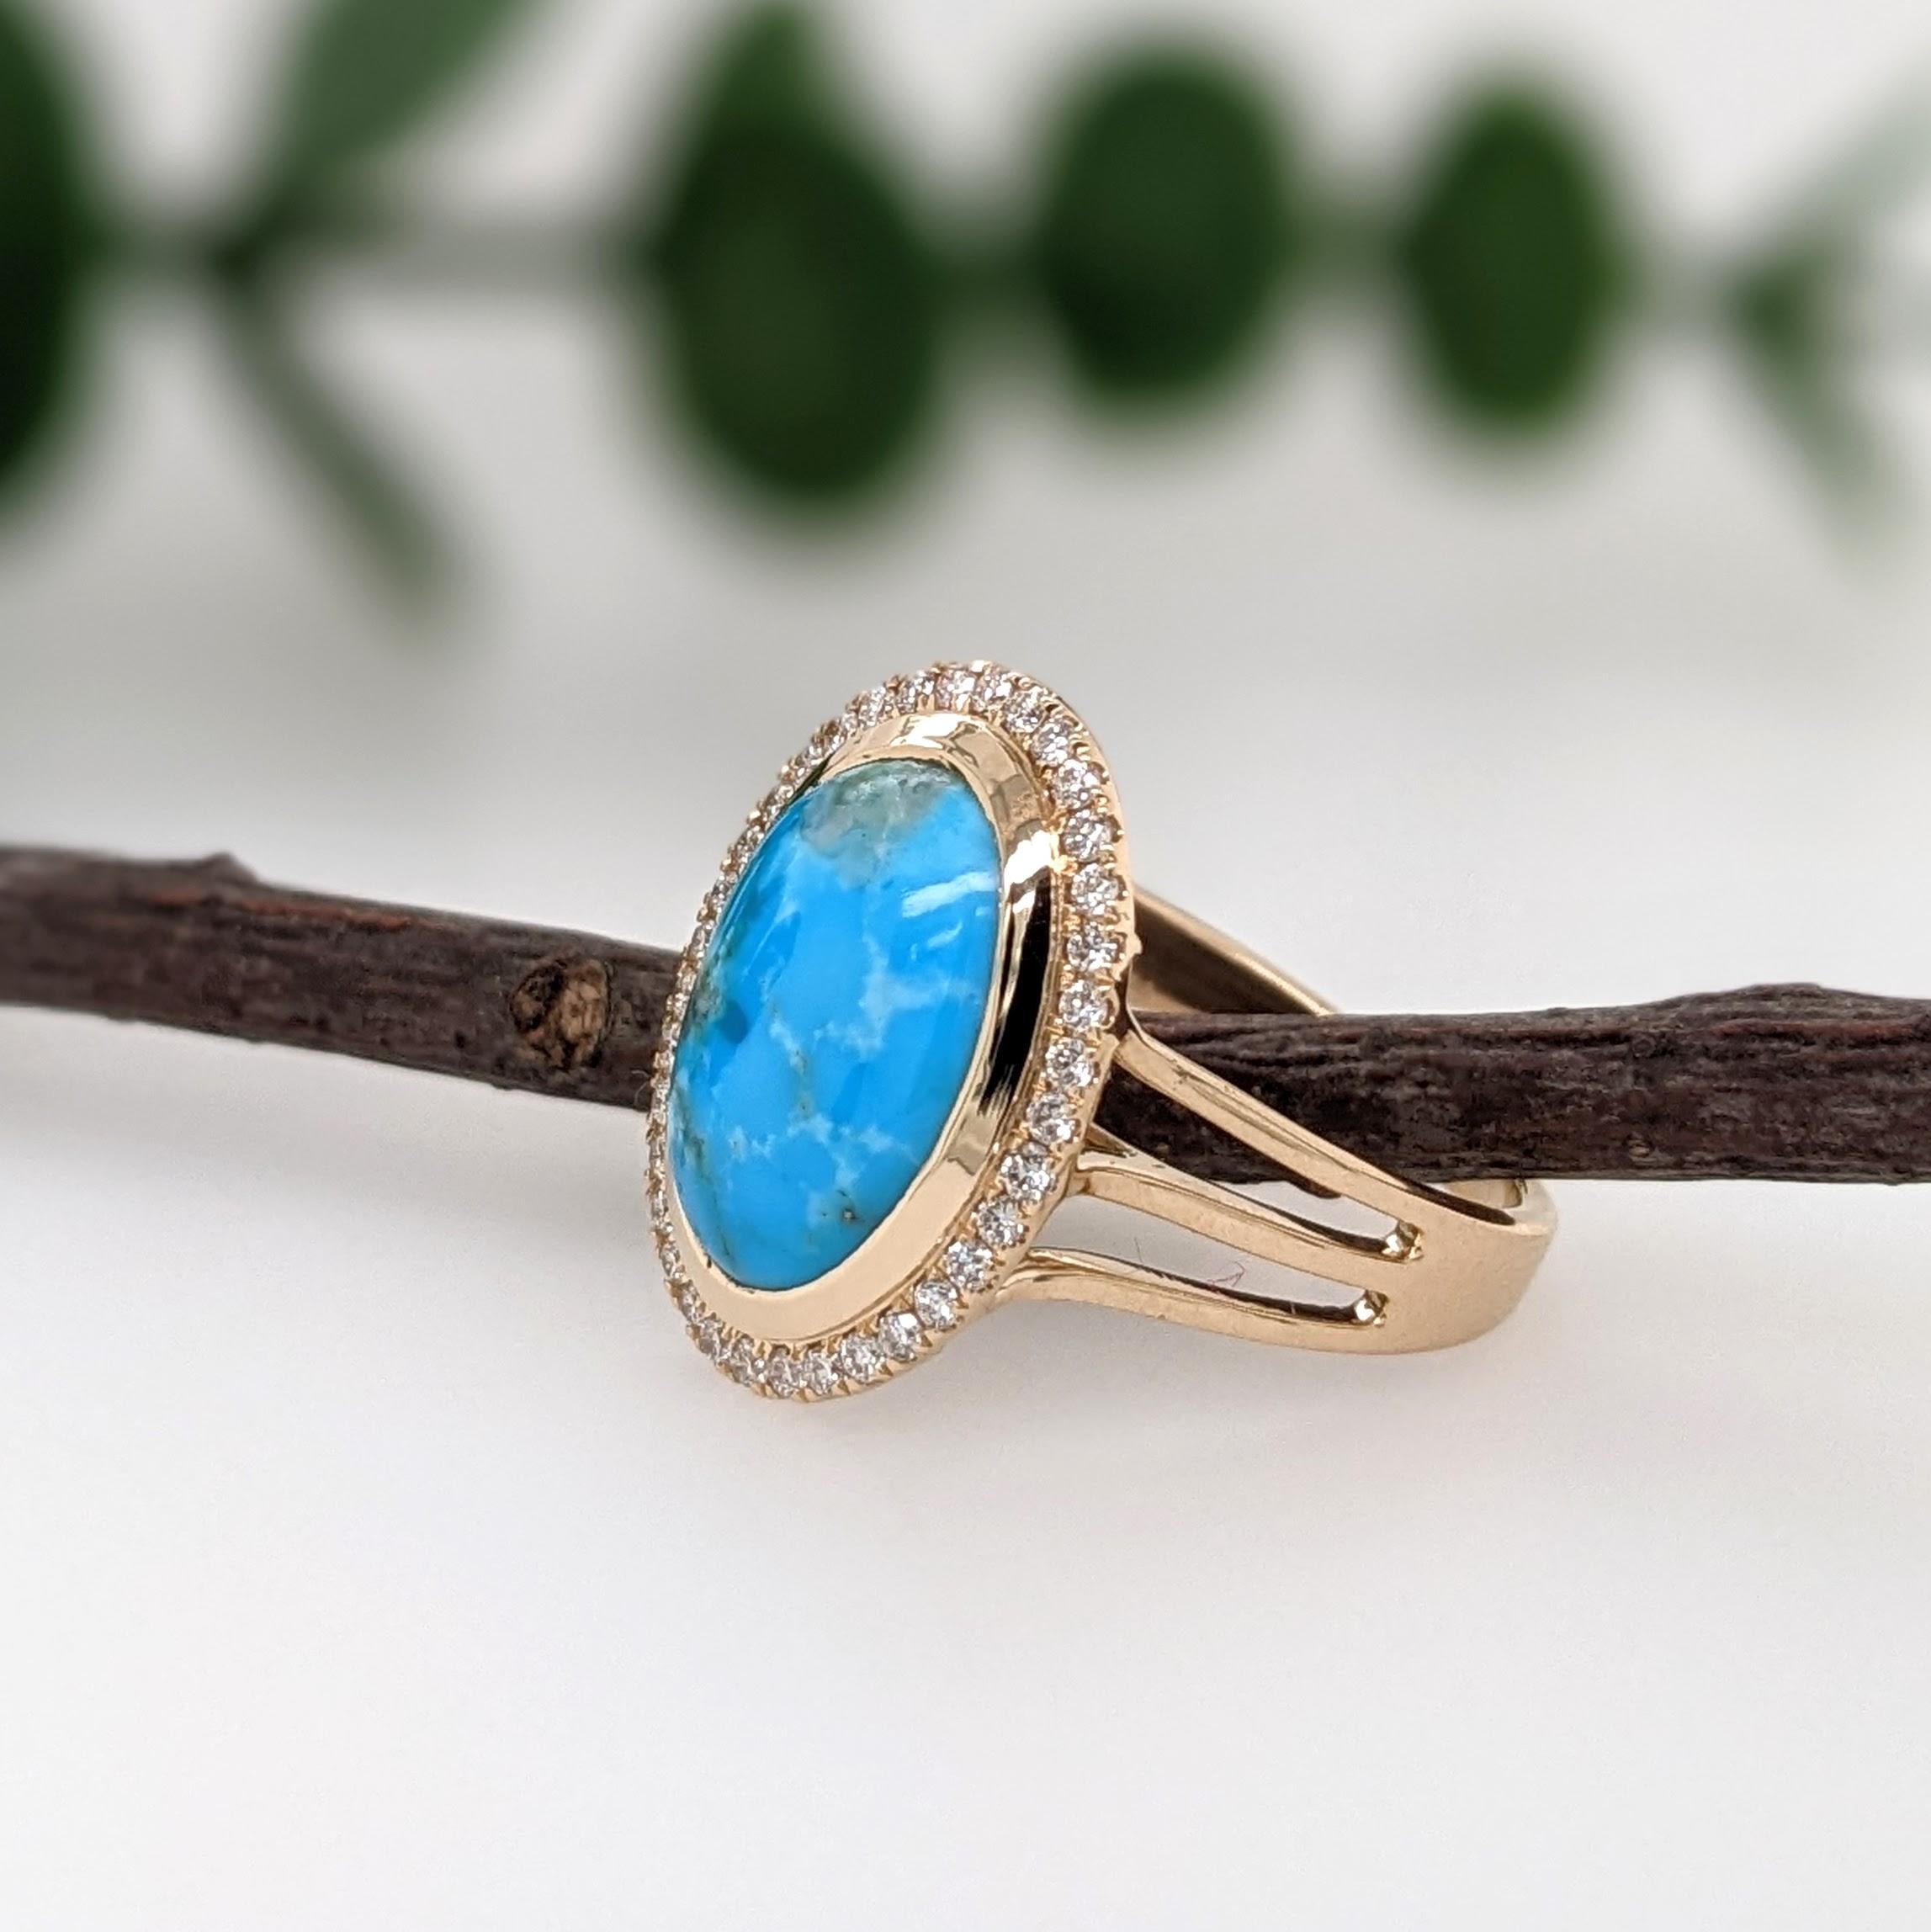 Oval Cut 4.68ct Sonoran Turquoise Ring w Diamond Halo in 14k Solid Yellow Gold Oval 14x10